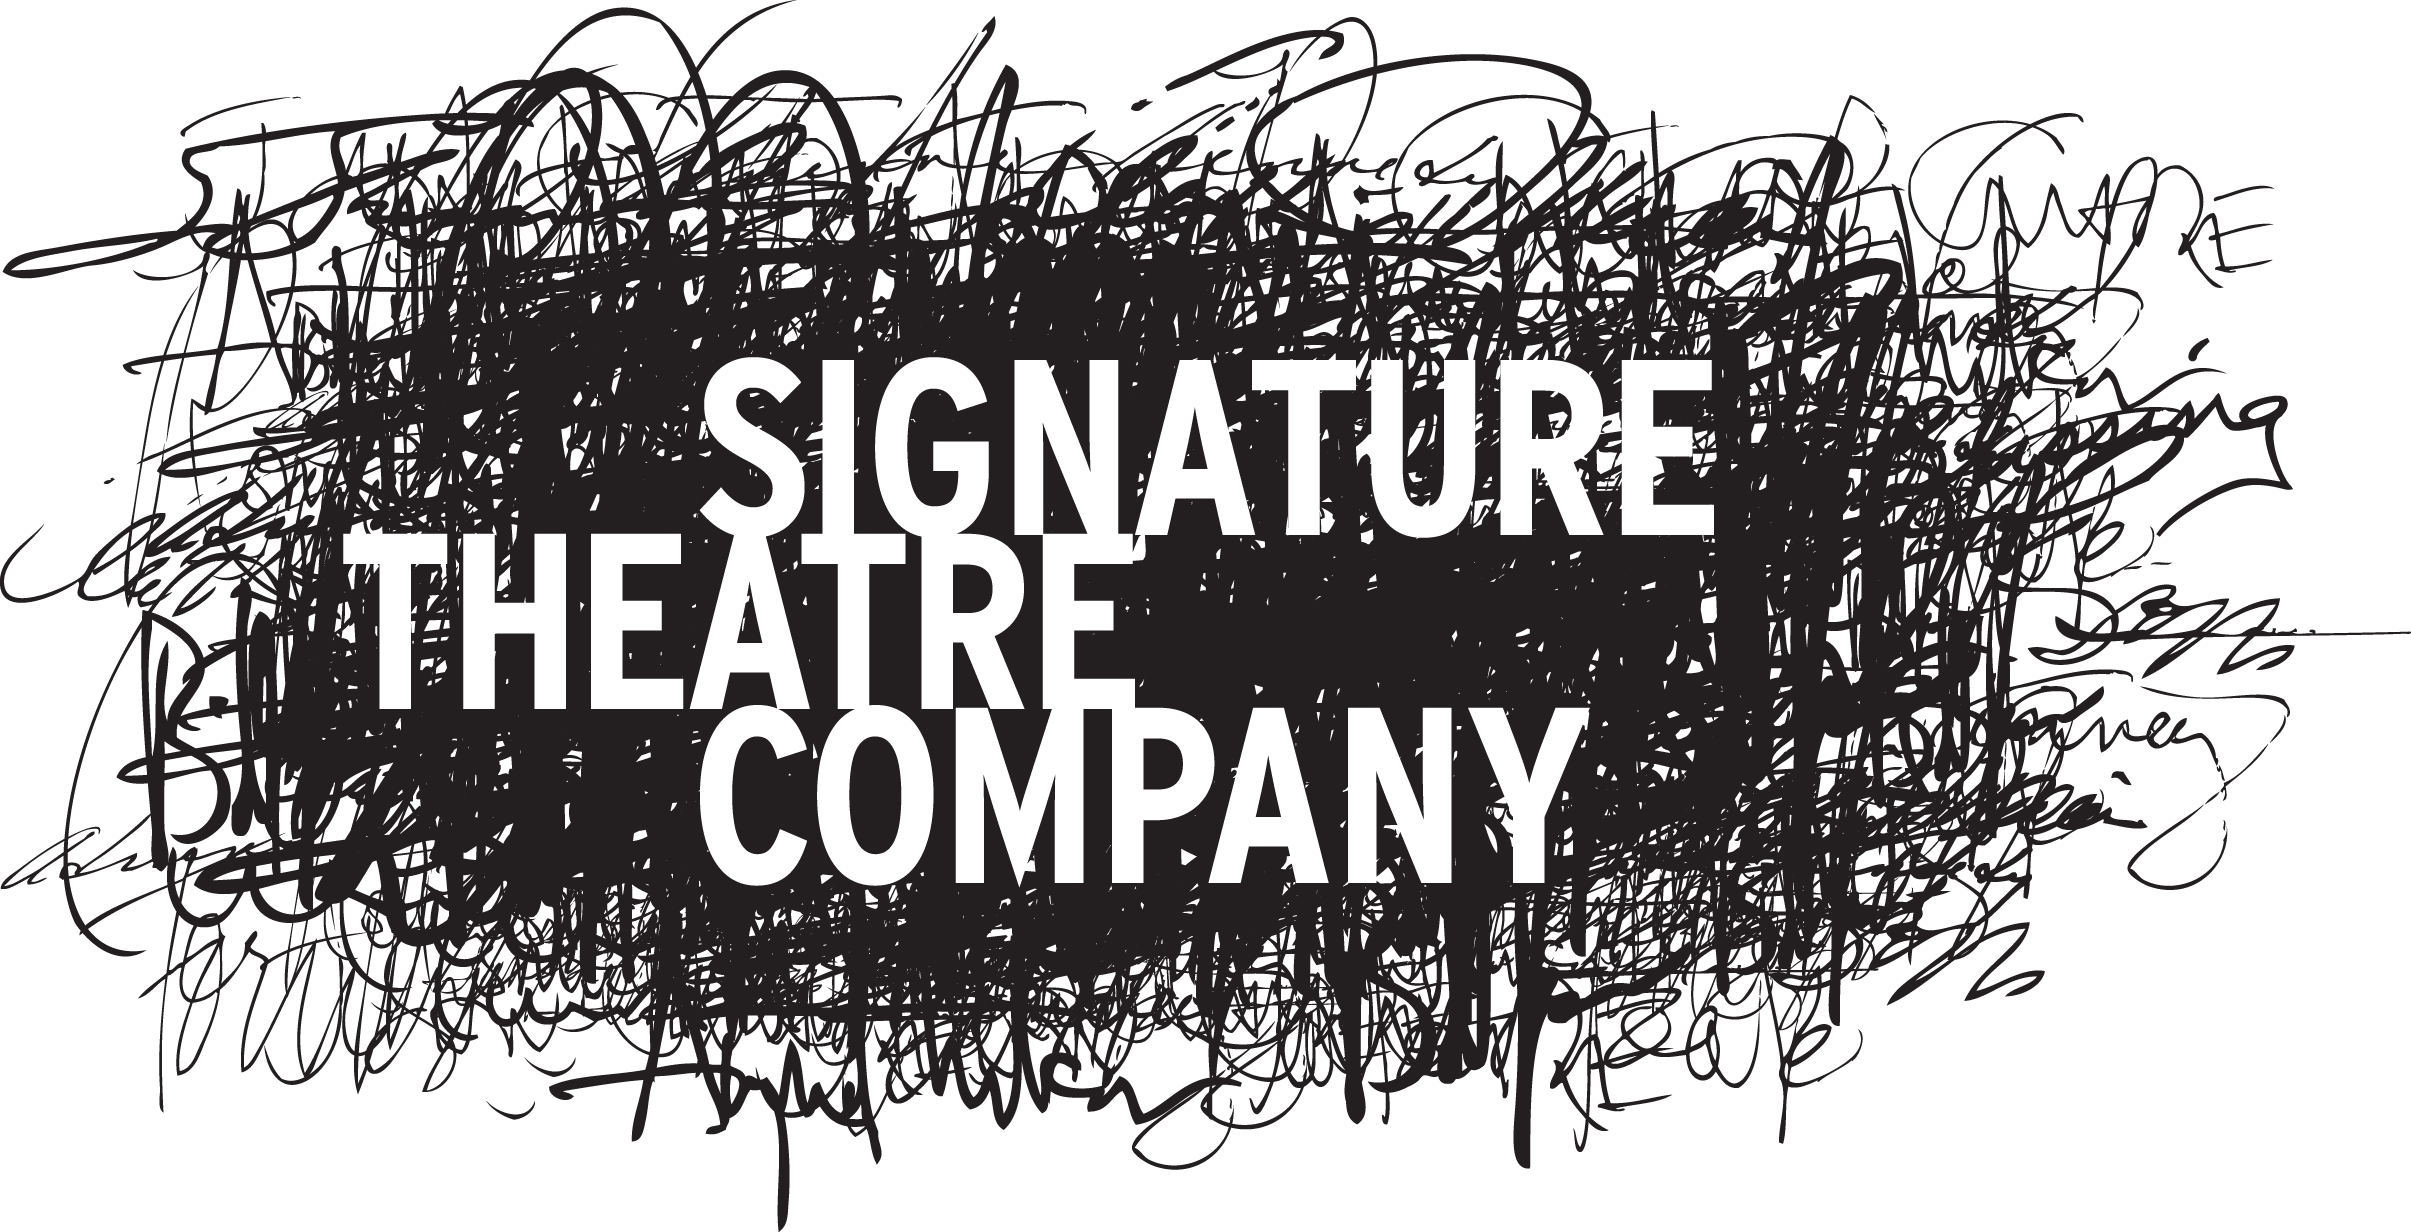 Project image 2 for Branding and Collateral Materials, Signature Theatre Company